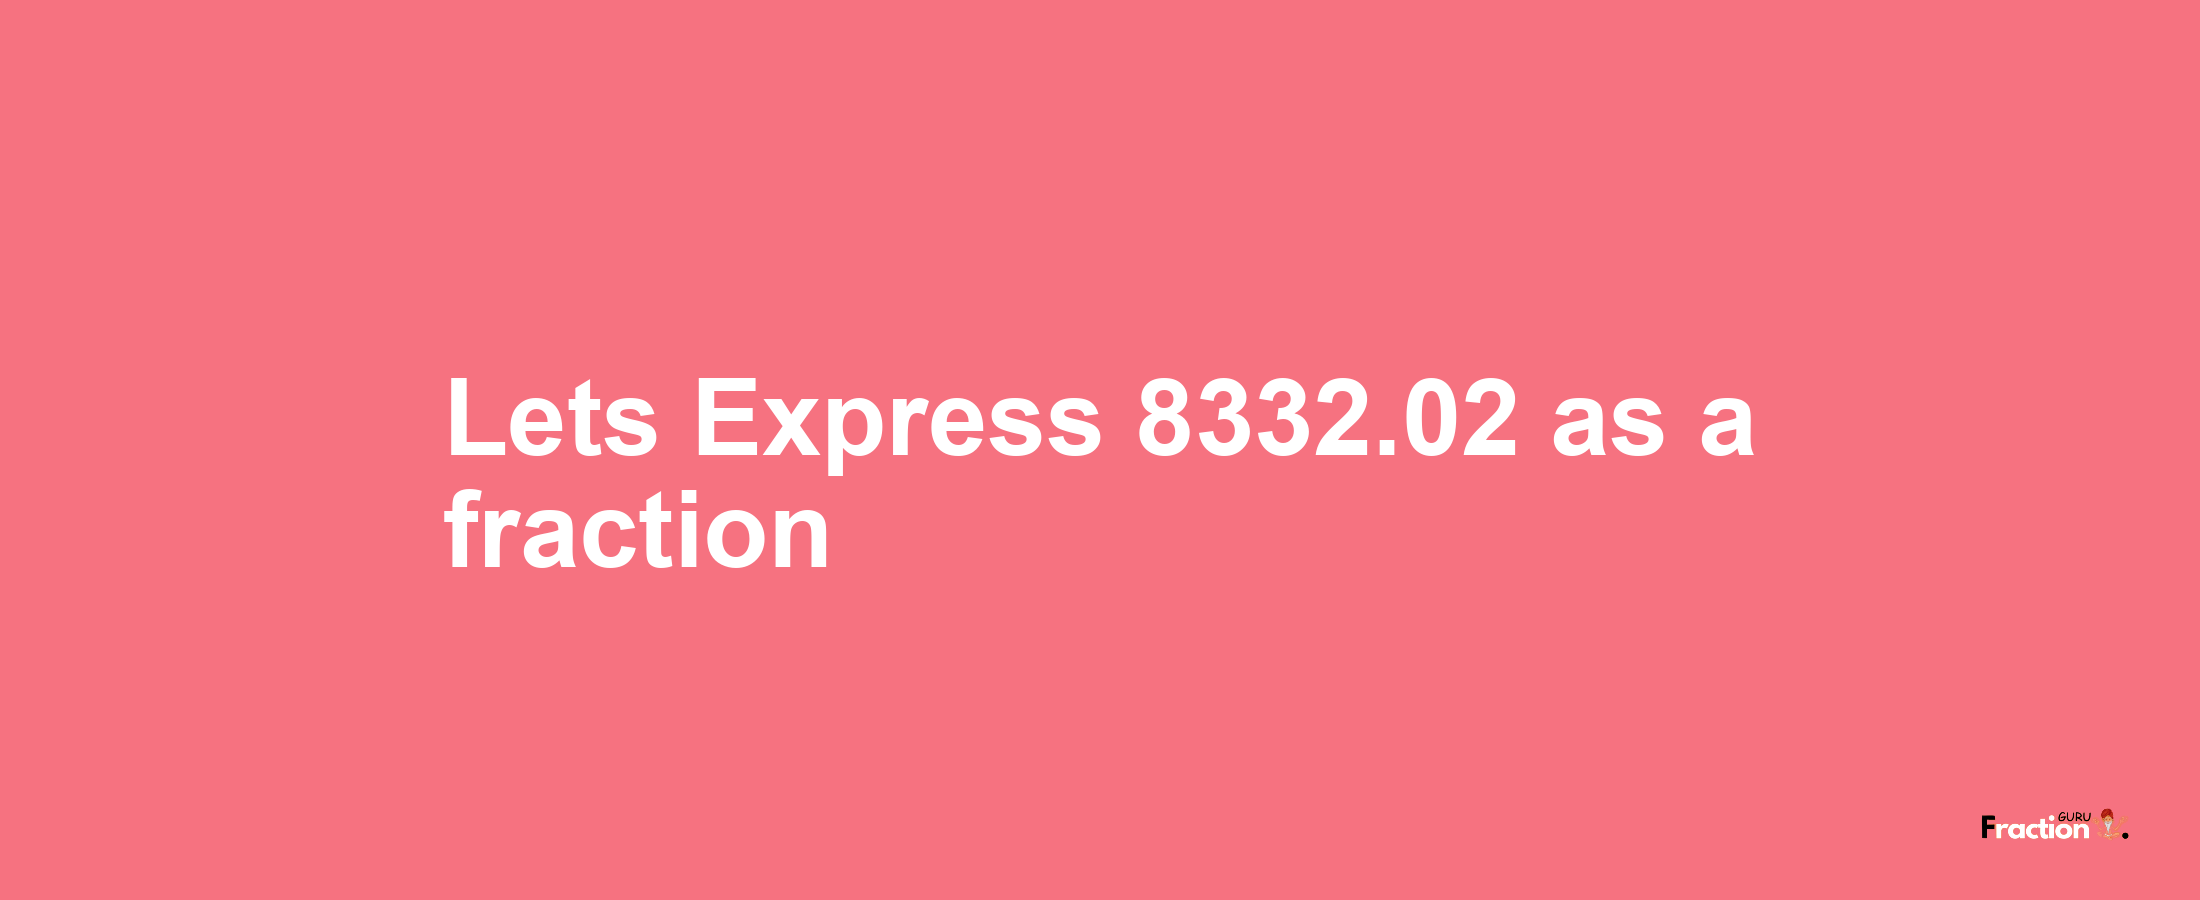 Lets Express 8332.02 as afraction